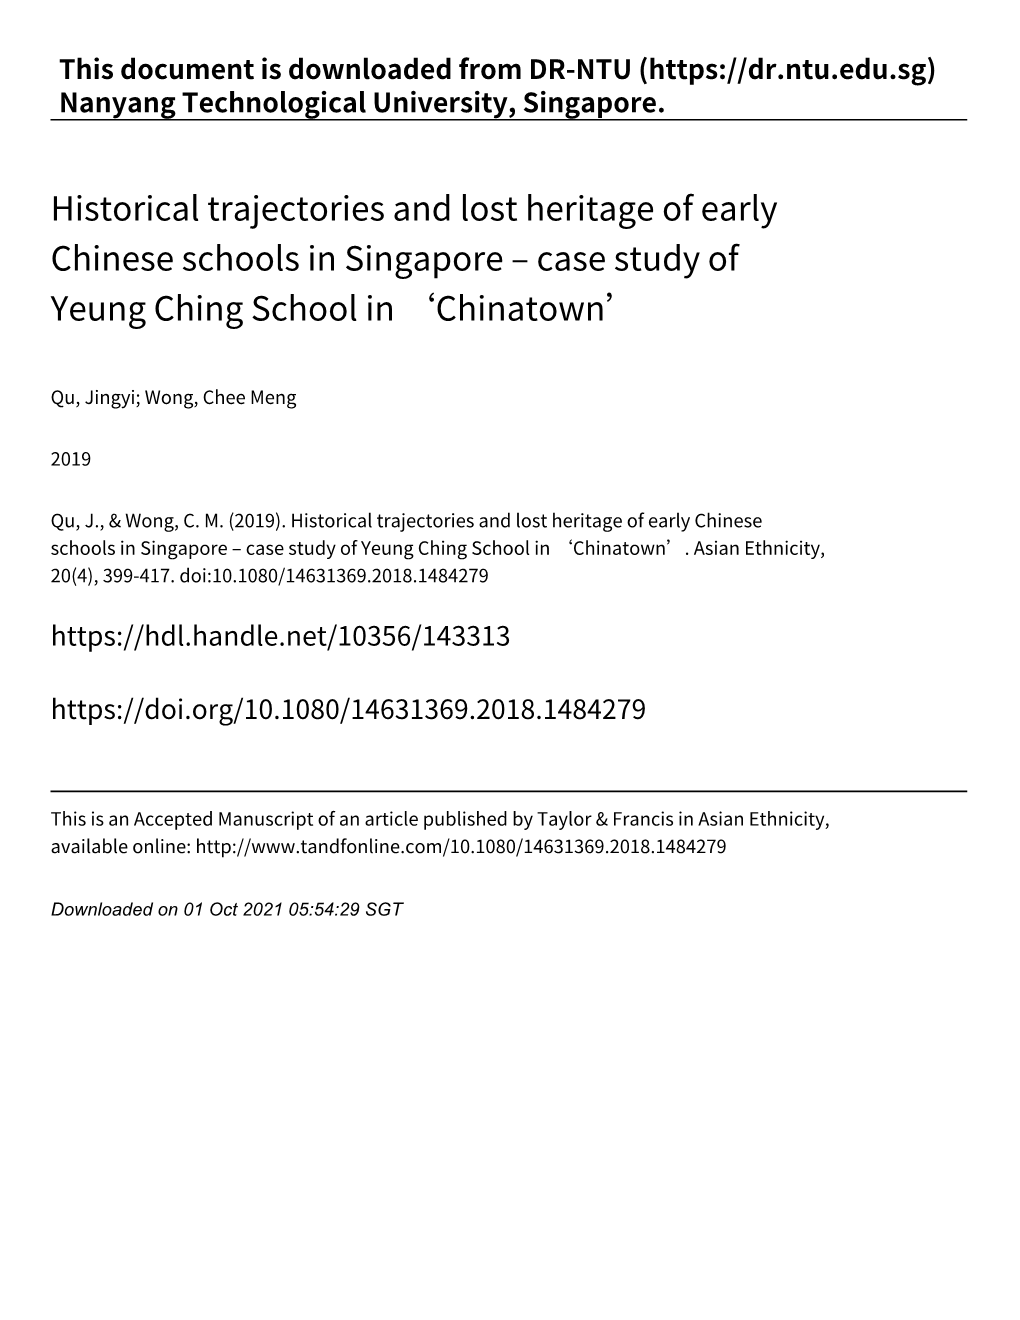 Historical Trajectories and Lost Heritage of Early Chinese Schools in Singapore – Case Study of Yeung Ching School in ‘Chinatown’